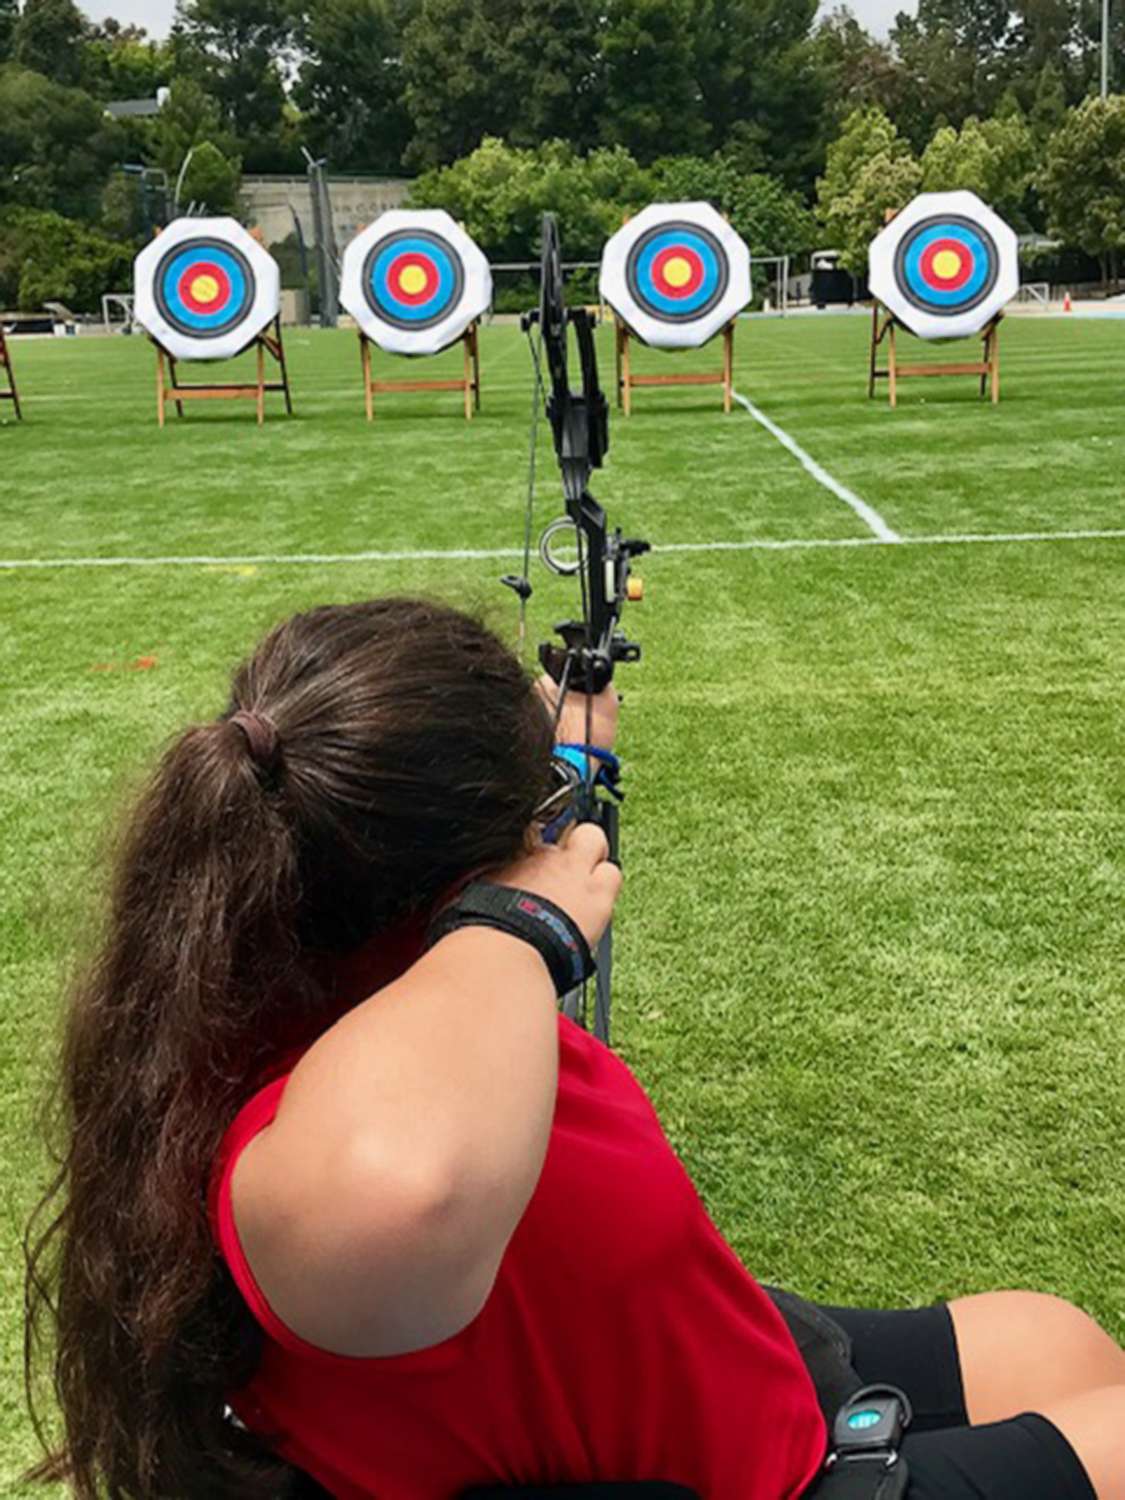 PHOTO: Olivia Curcuru competes at archery during the Angel City Games in Arizona, in June 2019.